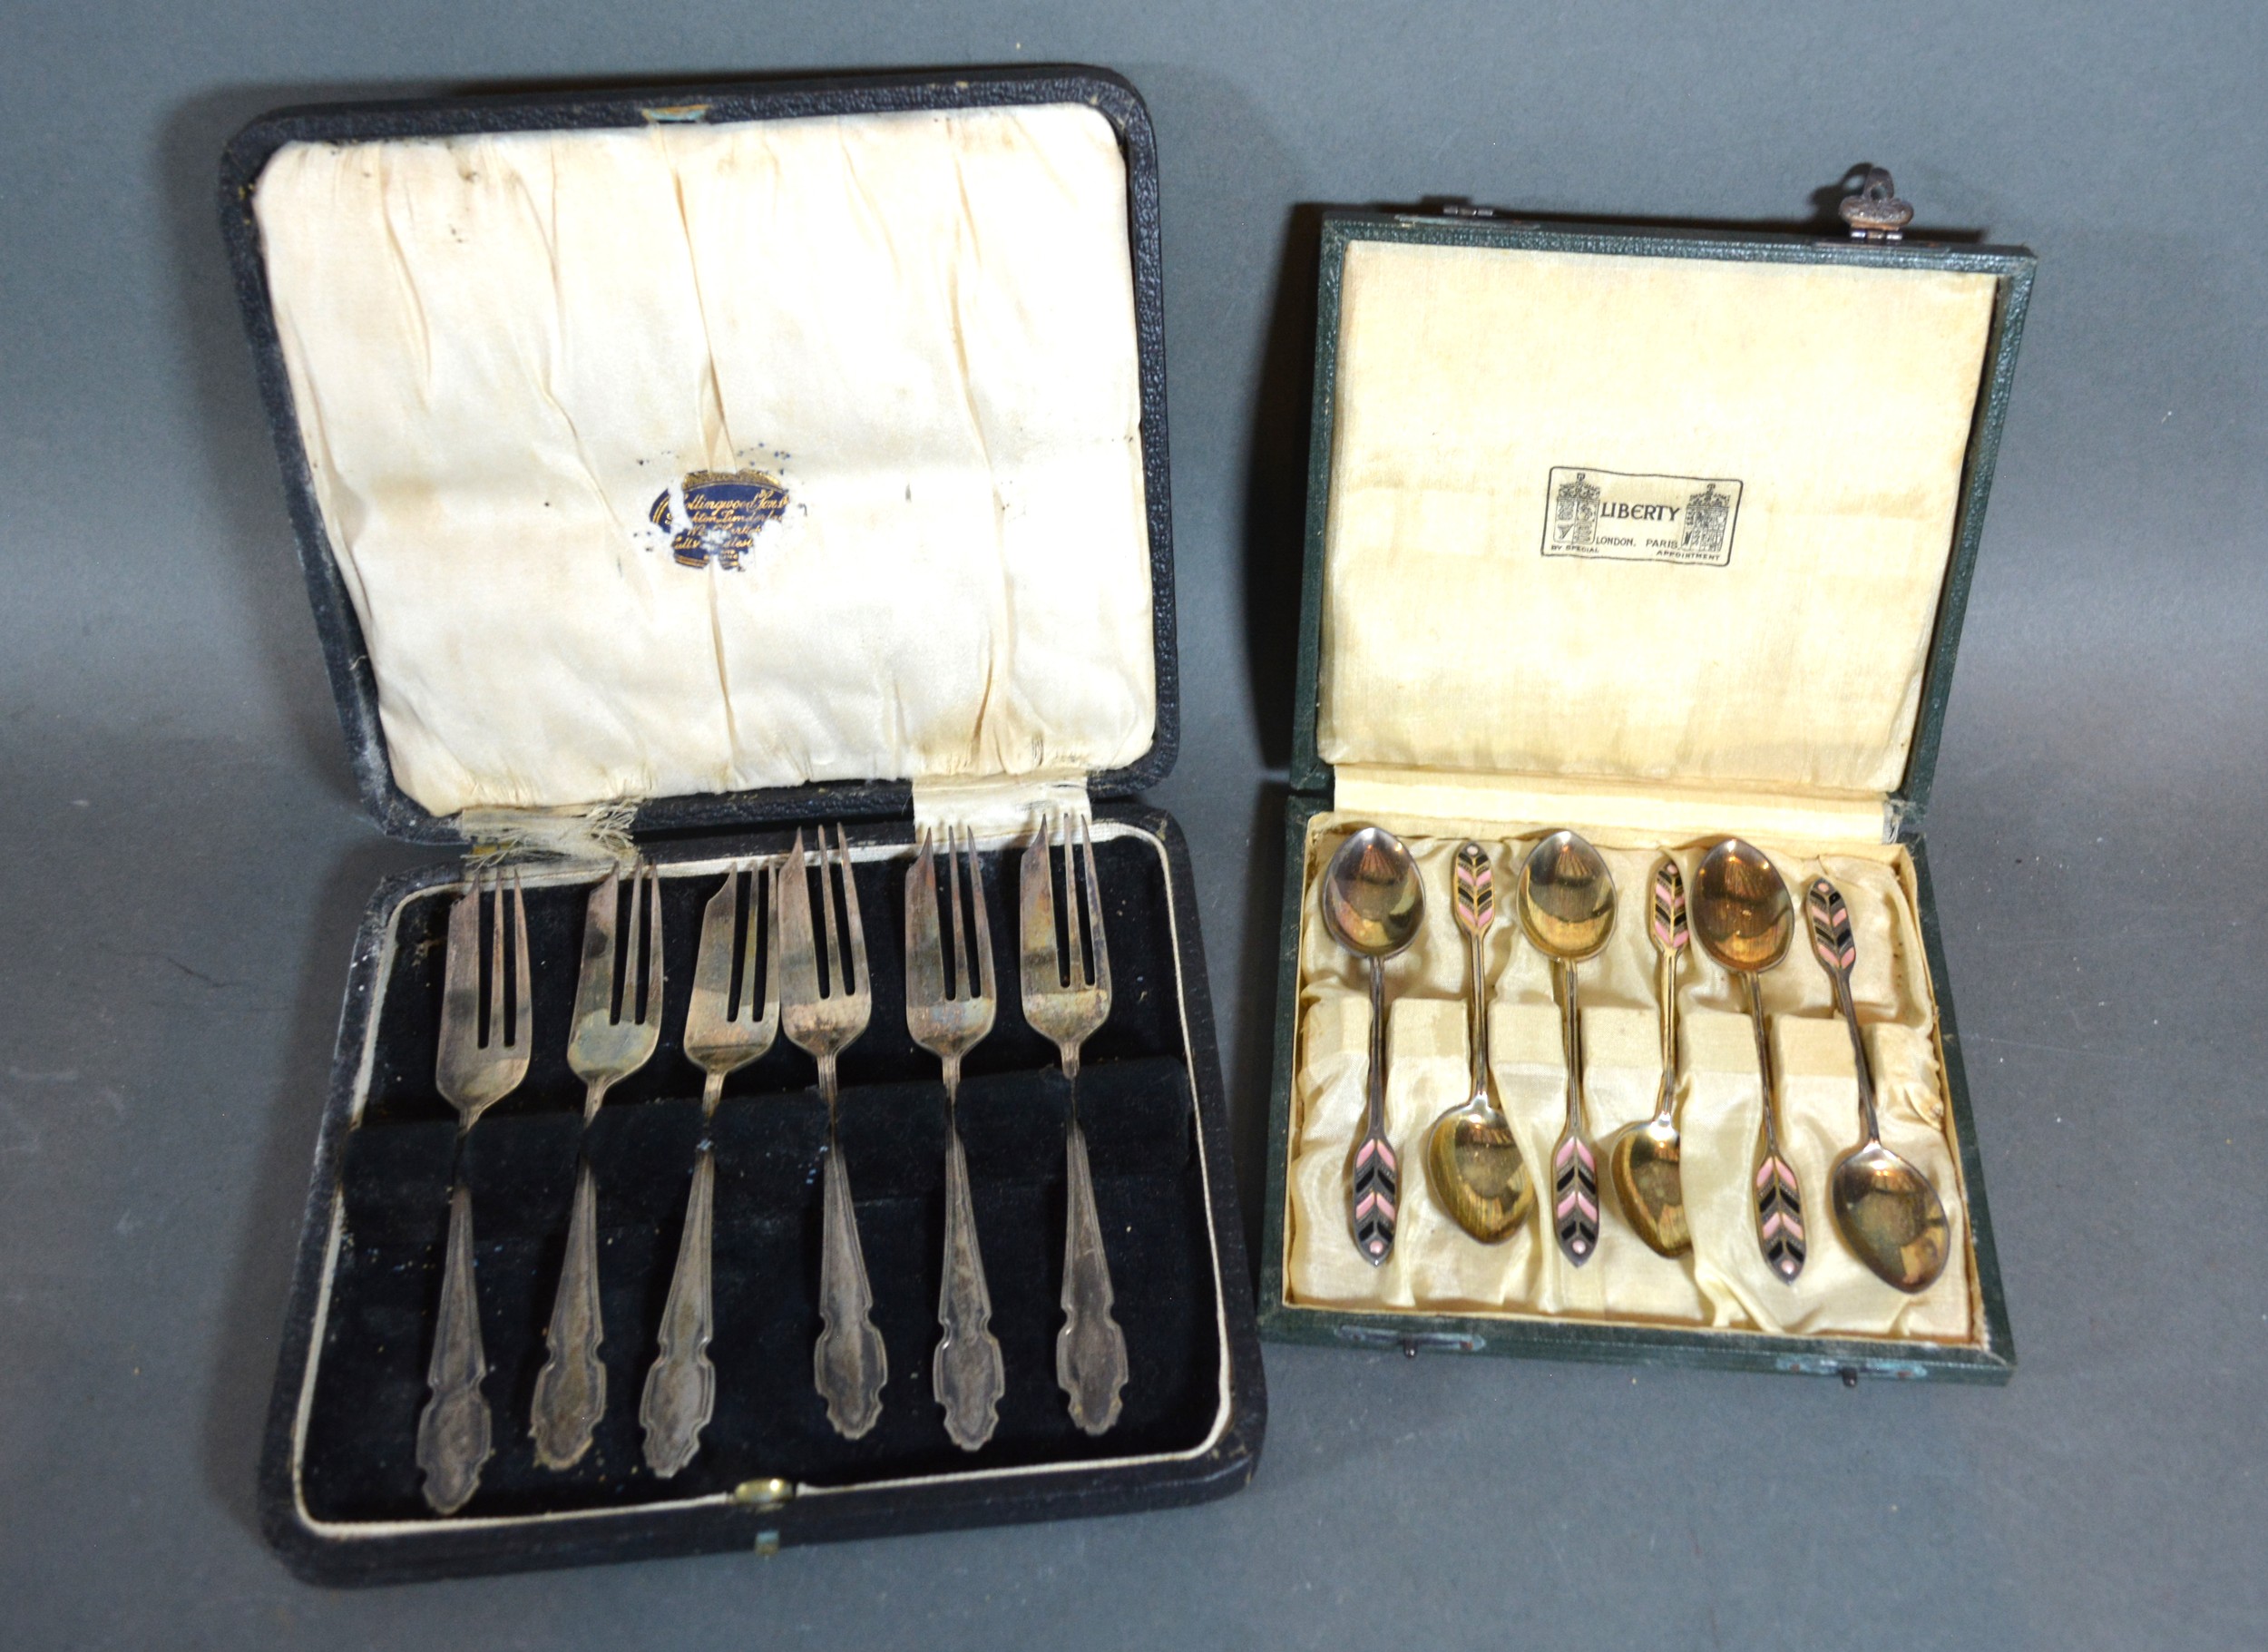 A Set of Six Birmingham Silver and Enamel Decorated Teaspoons from Liberty together with a set of